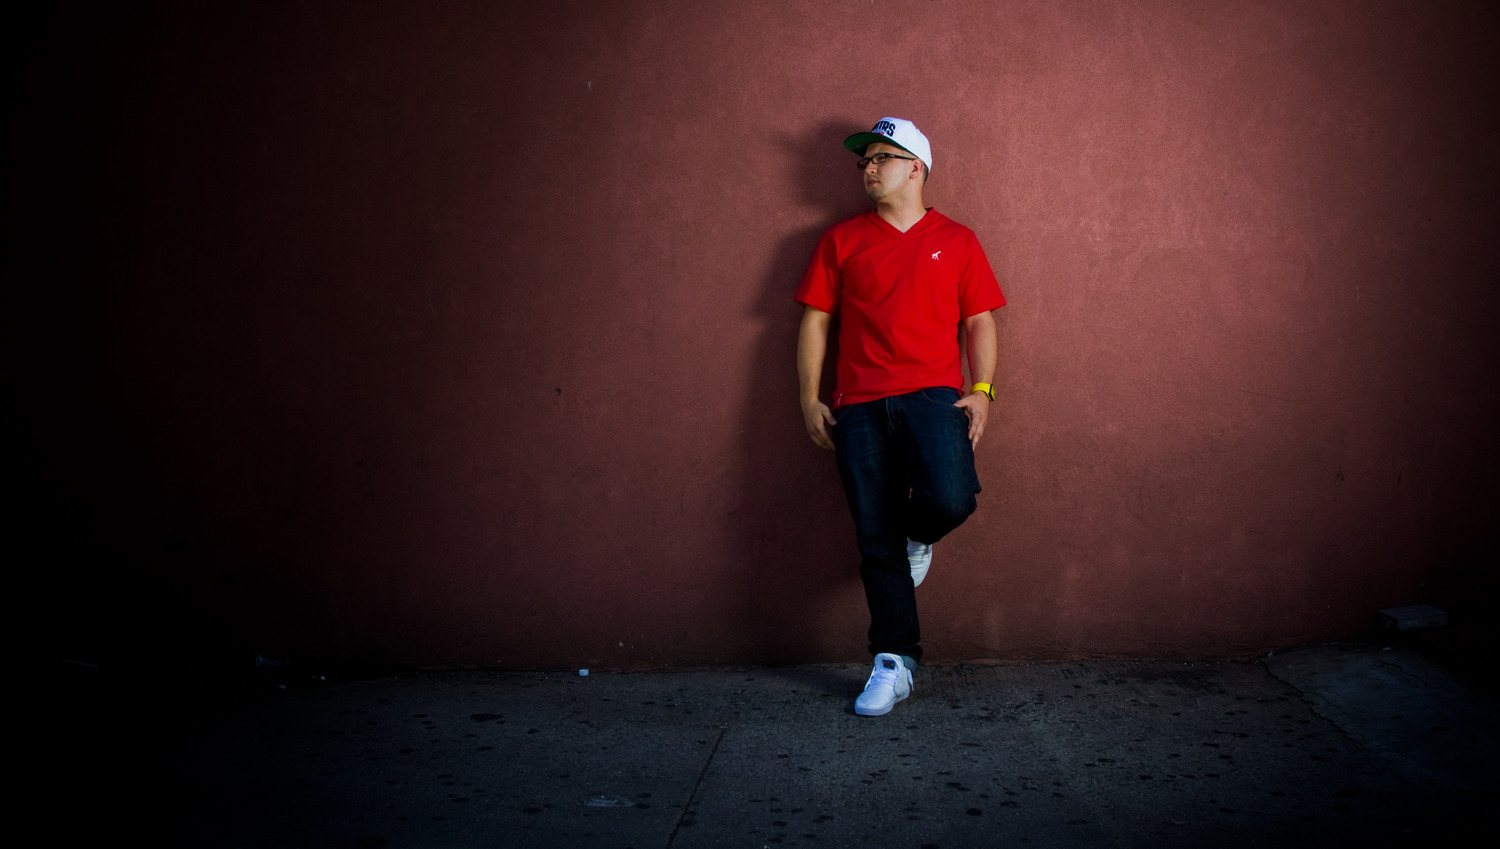 Introducing The Newest Reach Records artist Andy Mineo